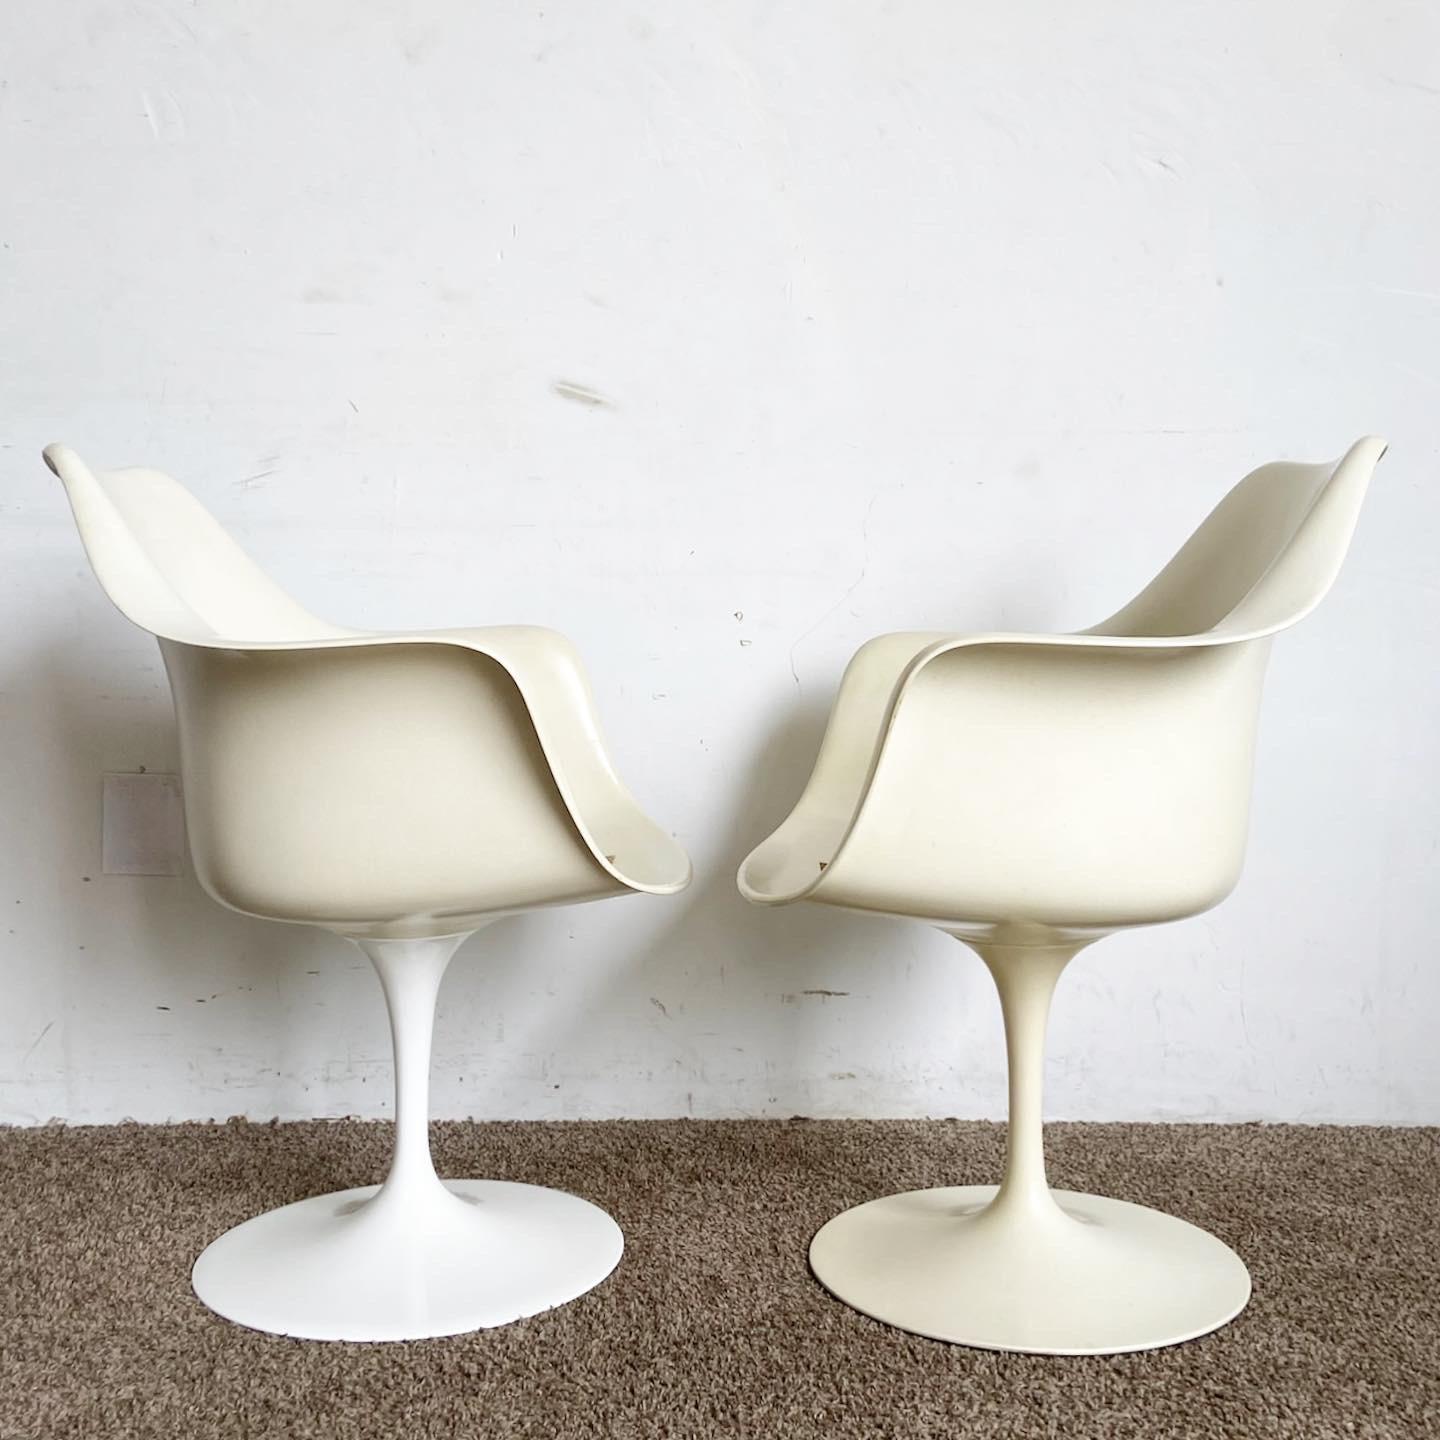 Elevate your dining experience with our Mid Century Modern Tulip BR50 Dining Chairs by Knoll. A blend of form, function, and timeless design.
One of the bases was replaced with a newer one. It shows a bit whiter and less aged than the other three.